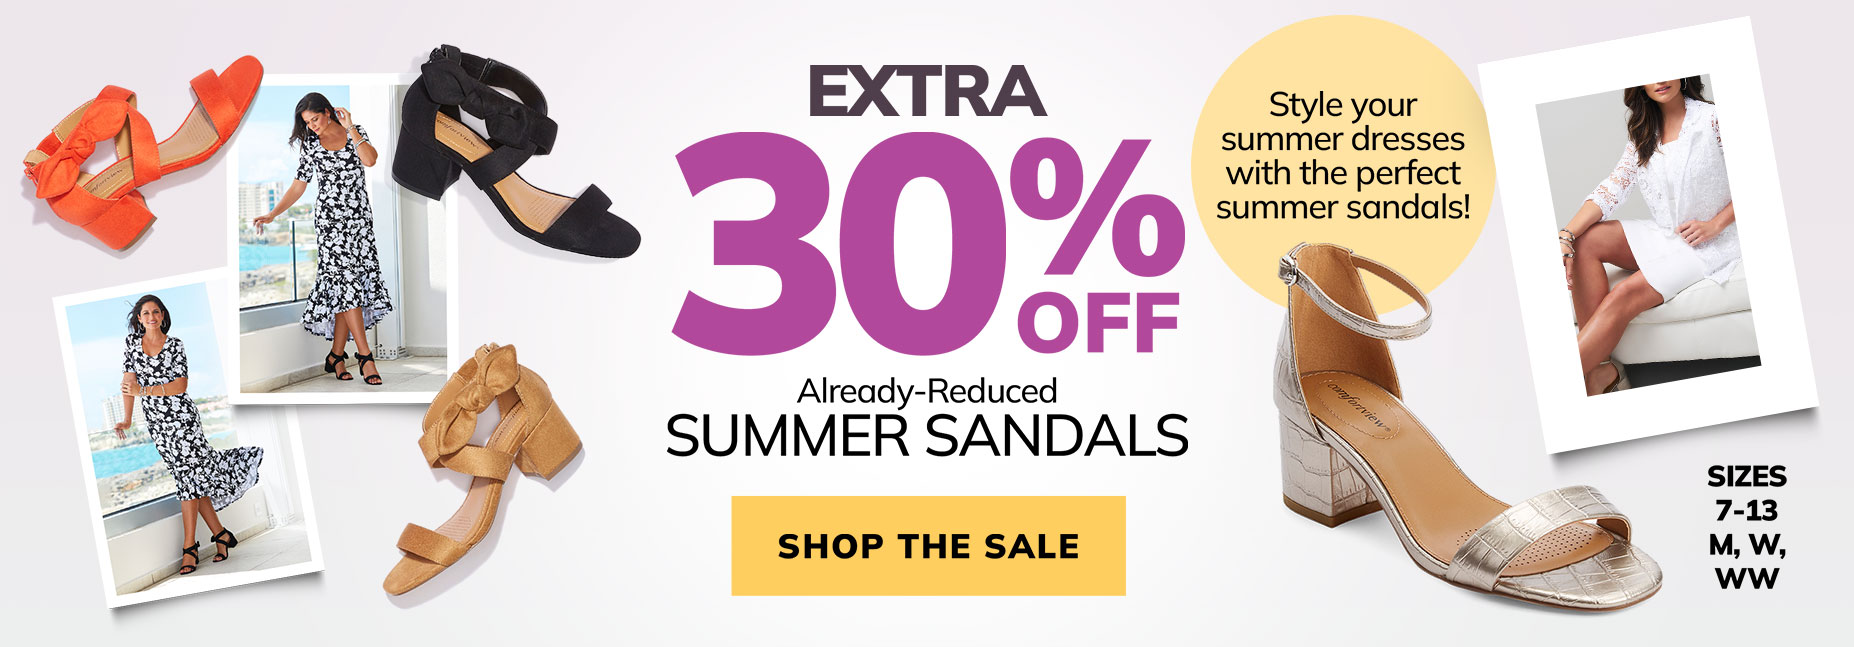 Extra 30% off - Already reduced summer sandals